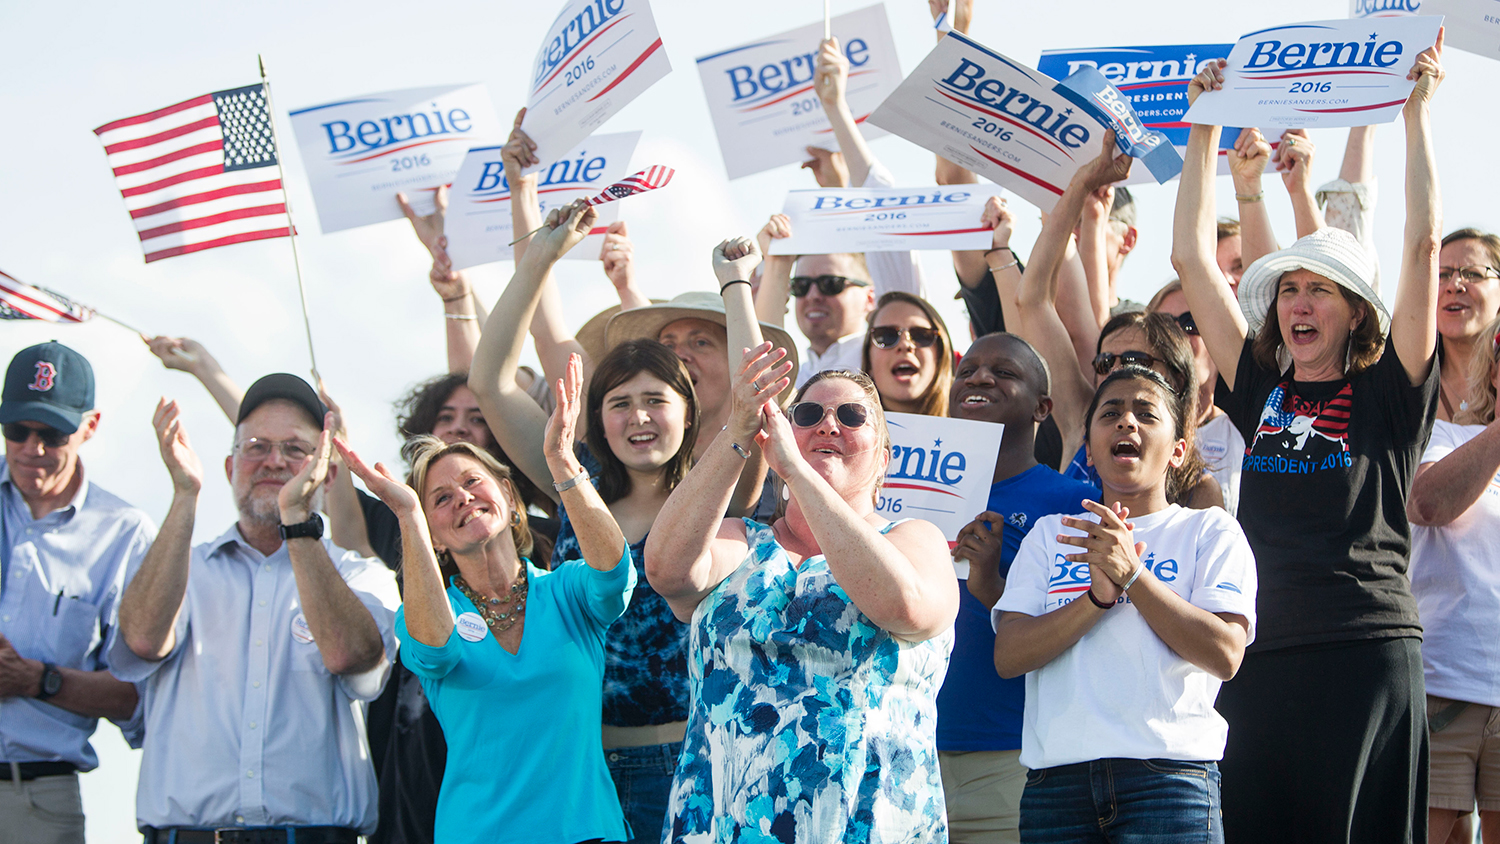 Supporters cheer while holding up signs during the official kickoff to Senator Bernie Sanders' presidential campaign in Burlington, Vermont, U.S., on Tuesday, May 26, 2015.
